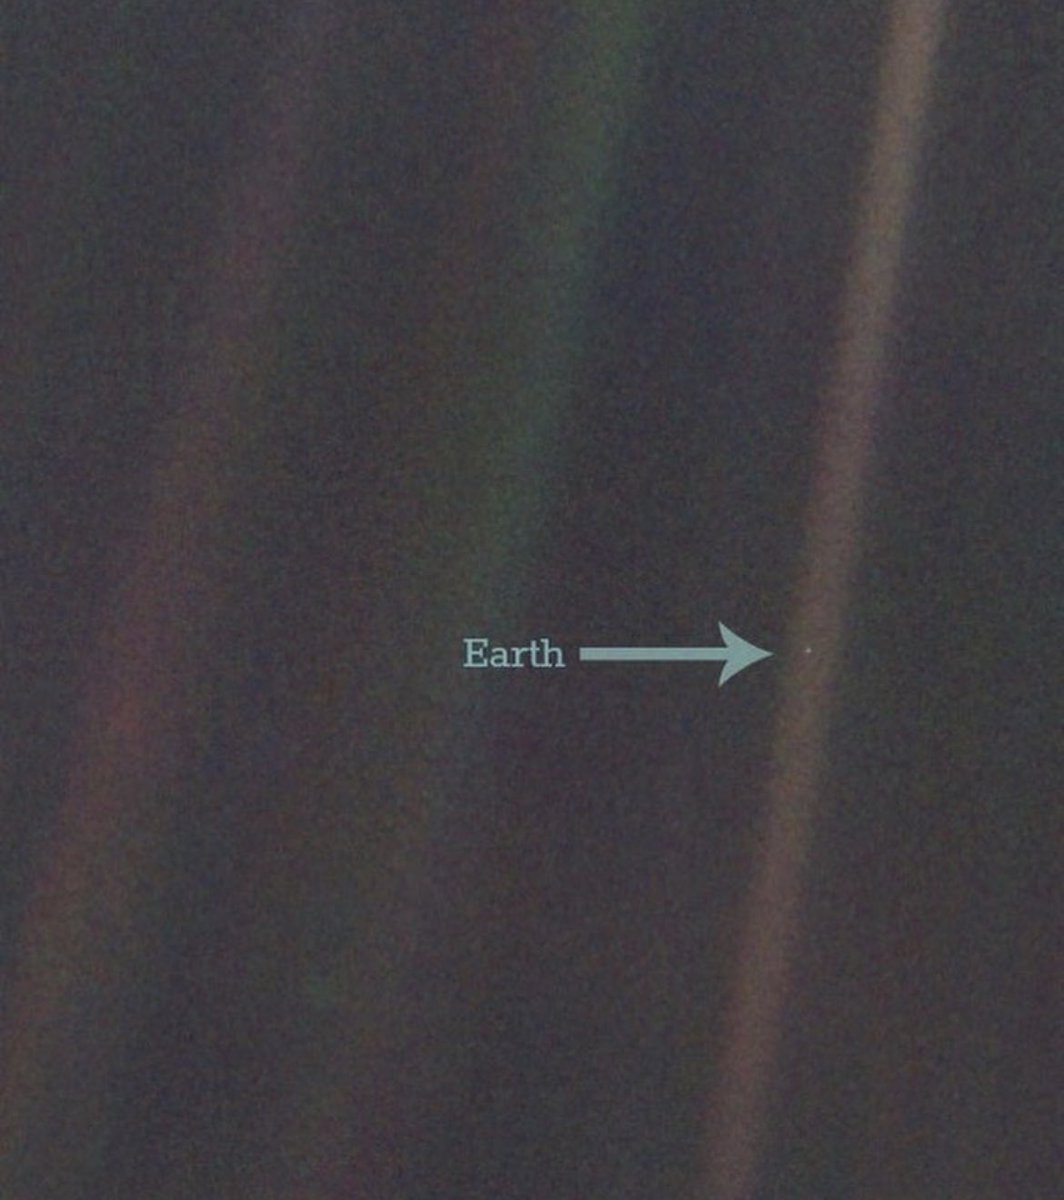 The Pale Blue Dot is an iconic photograph of Earth captured by the Voyager 1 space probe in 1990. Taken from a distance of around 6 billion kilometers (3.7 billion miles) as Voyager 1 was departing our solar system, the image portrays Earth as a tiny, pale blue speck in the